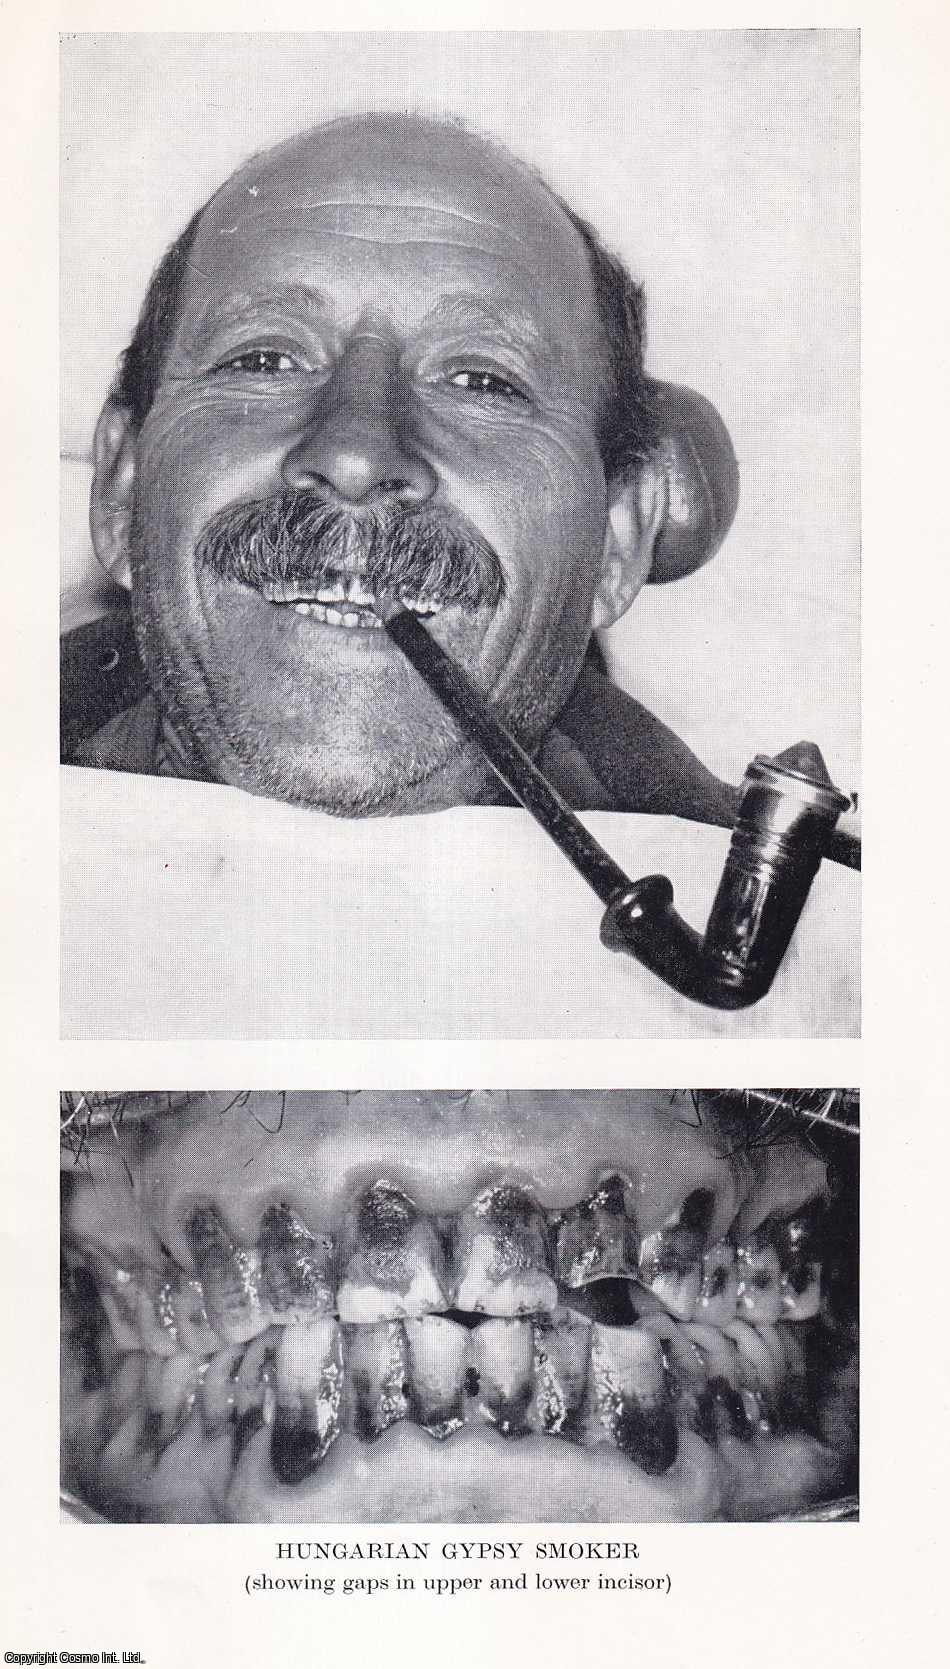 Dr. K. Balogh and Dr. G. Huszar - The Teeth of Hungarian Gypsies. An uncommon original article from the Journal of the Gypsy Lore Society, 1962.